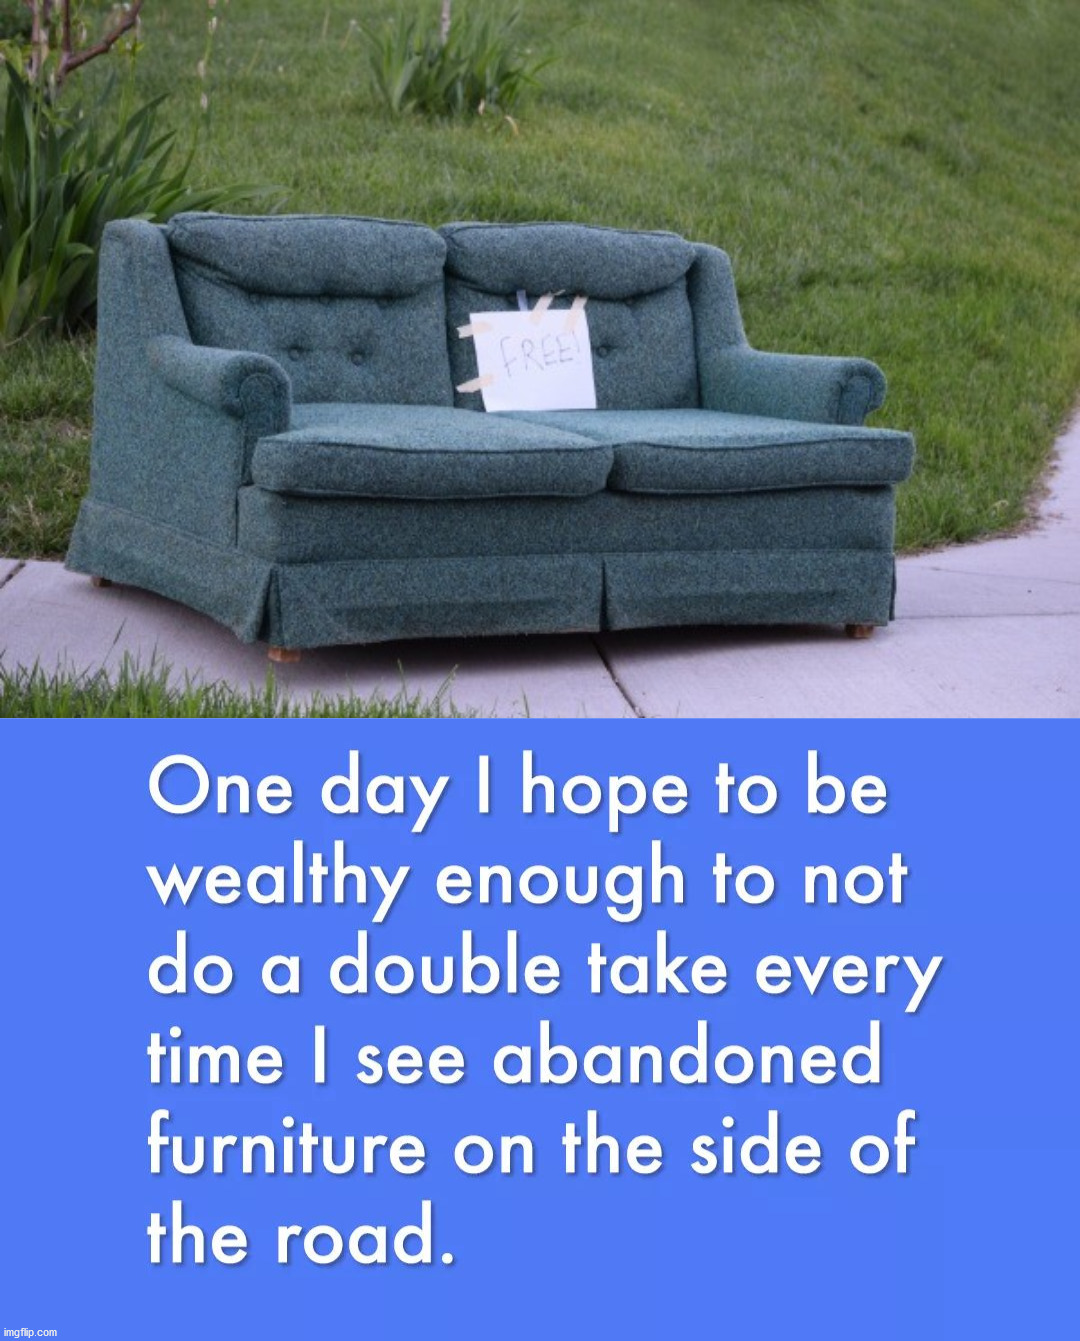 As long as it does not smell like cat pee. | image tagged in furniture,free stuff,abandoned,wealth,road trip | made w/ Imgflip meme maker